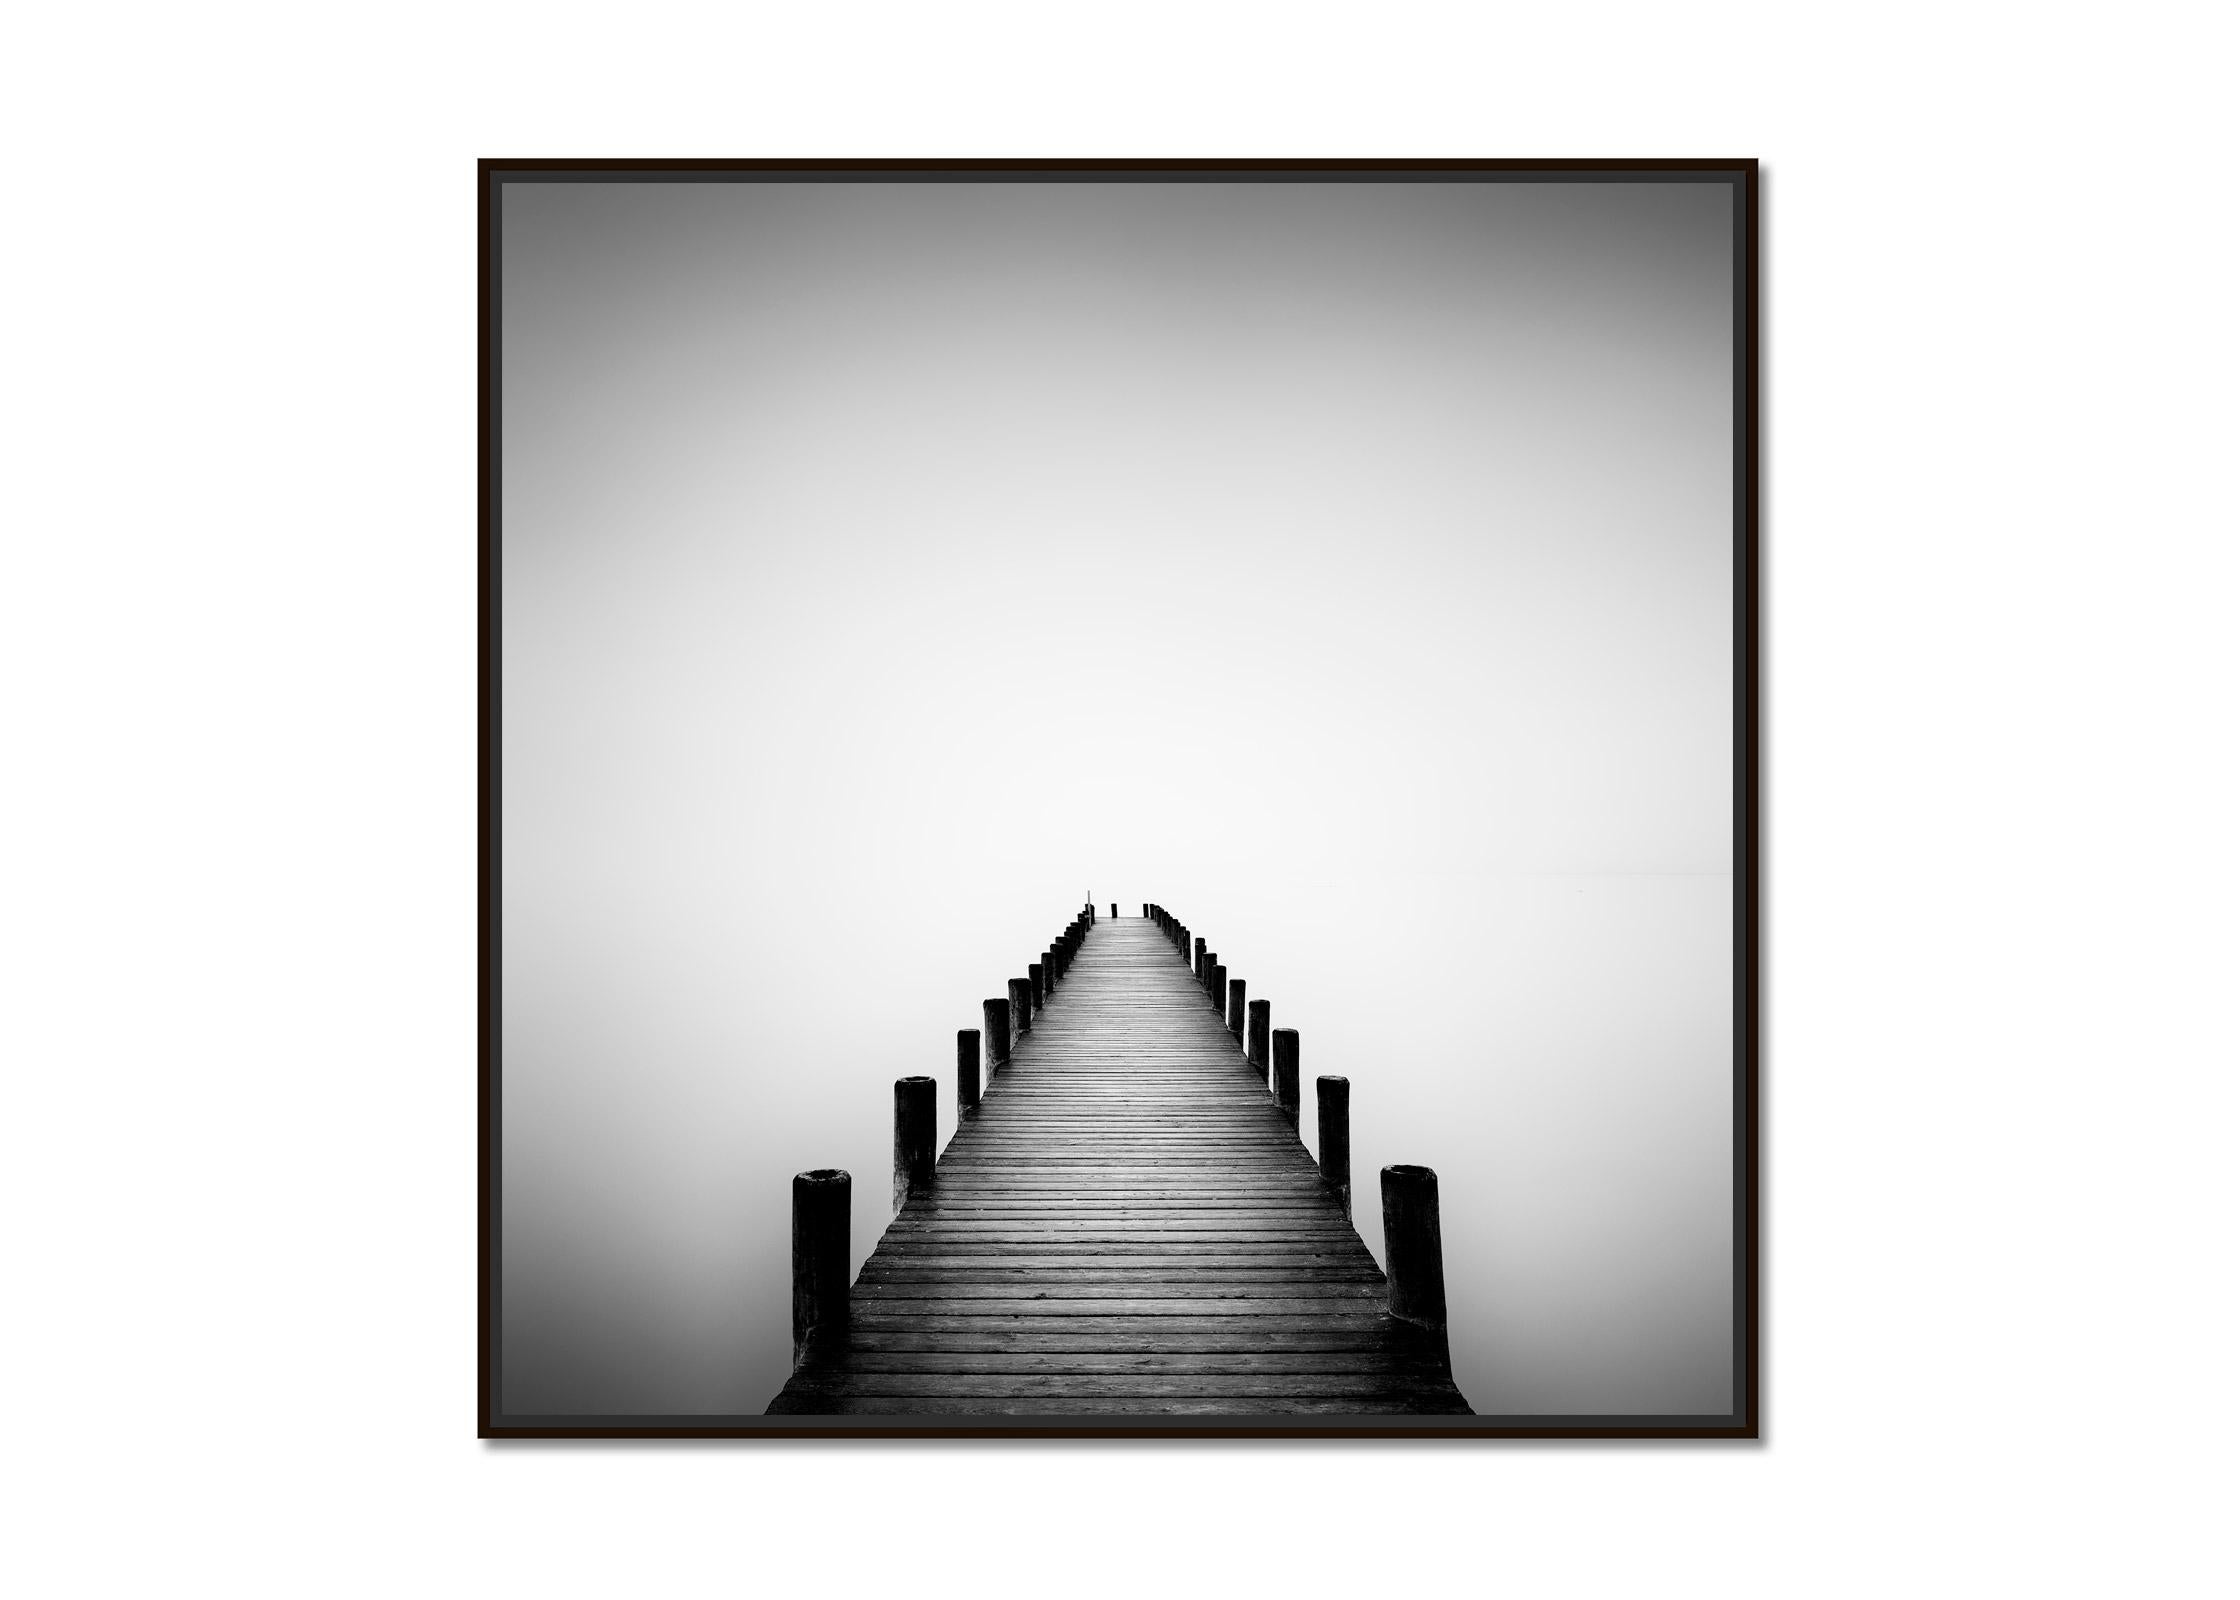 Pier on misty Lake, long exposure, black and white art waterscape photography - Photograph by Gerald Berghammer